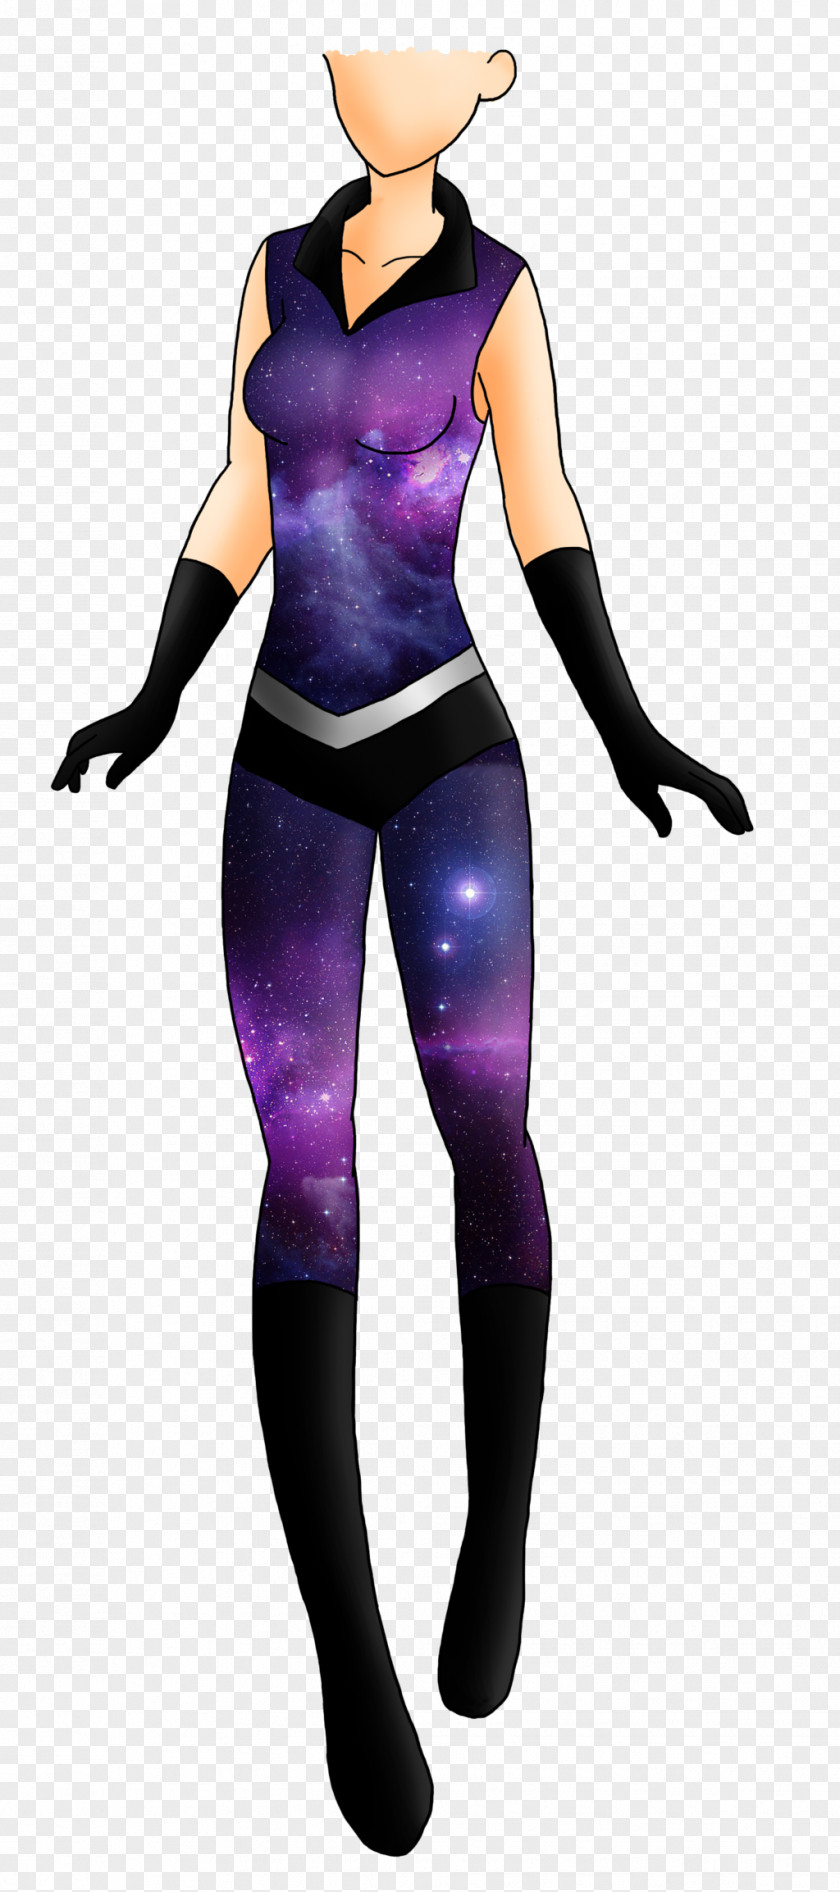 Ginny Weasley Wetsuit Spandex Character Animated Cartoon Fiction PNG